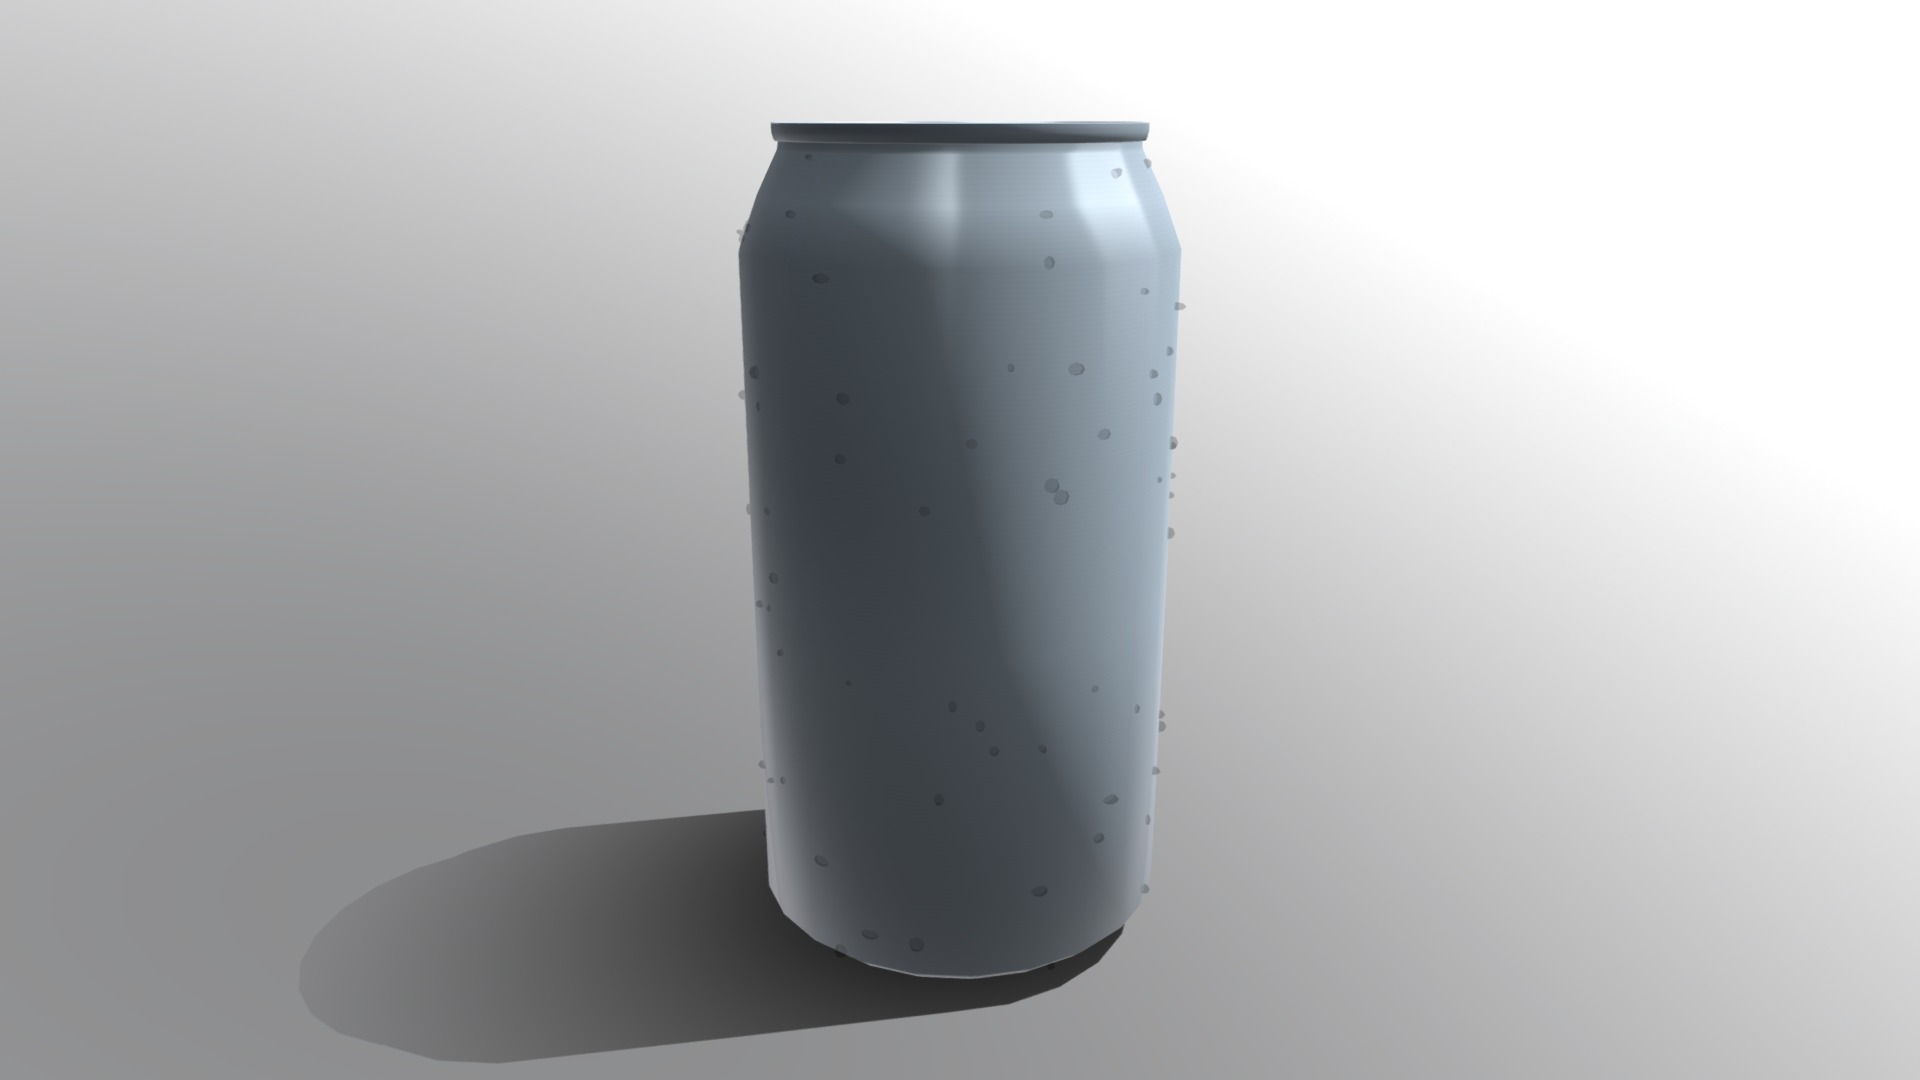 3D model Beverage Can 330ml Low Poly - This is a 3D model of the Beverage Can 330ml Low Poly. The 3D model is about a cylindrical object with a black top.